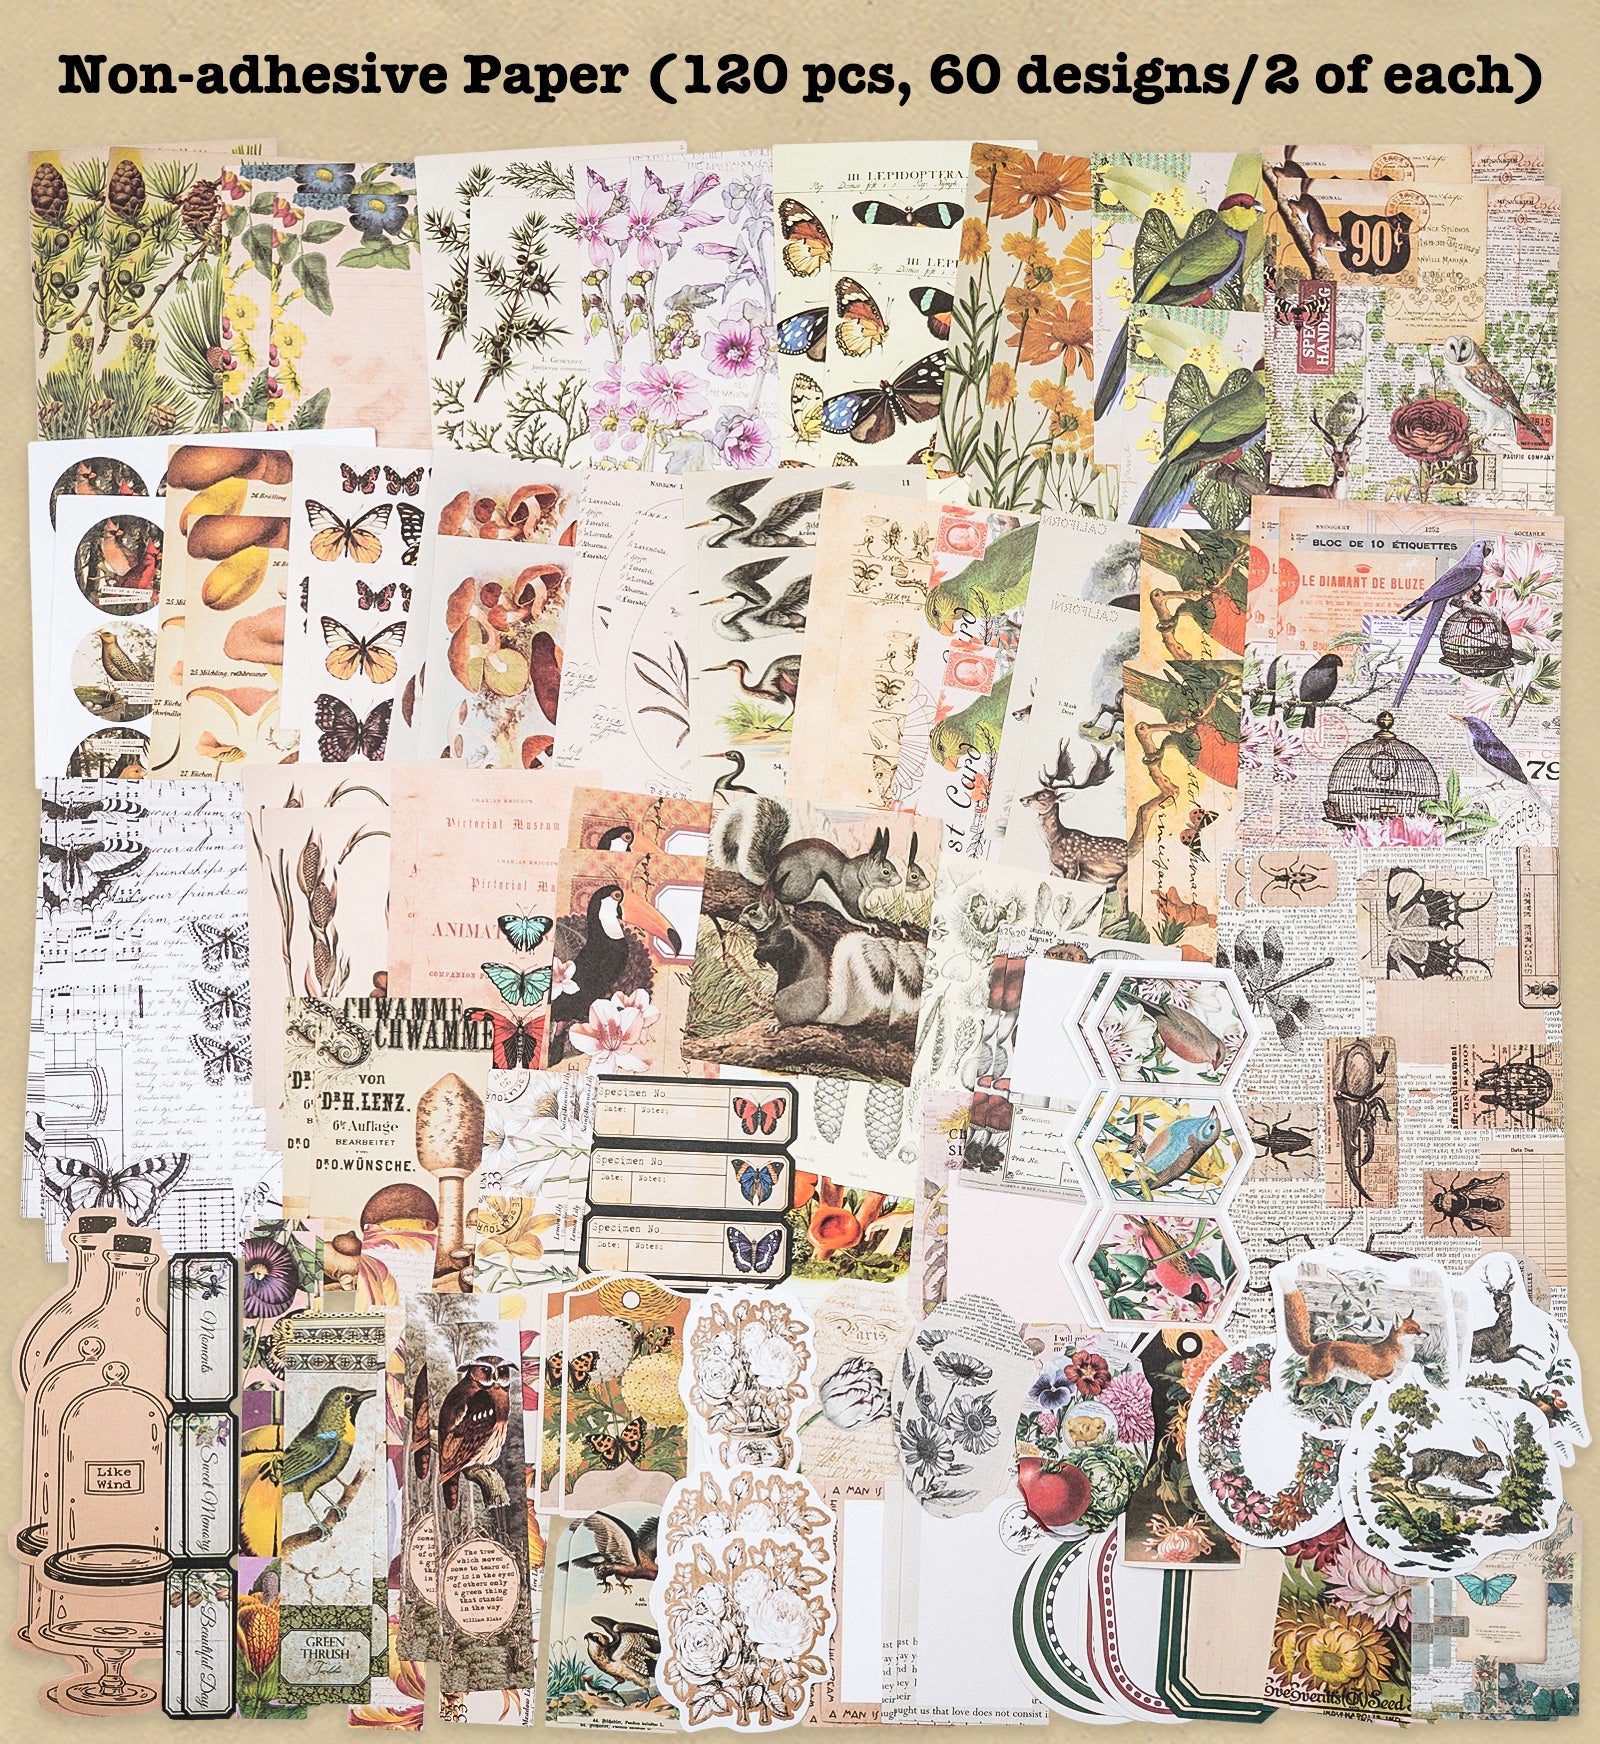 FARM SCRAPBOOK SUPPLIES: A Collection of Over 200 Adorable Farm Ephemera to  Cut Out To Make Cards, Junk Journals, Scrapbooking, and Other Paper Crafts  - Yahoo Shopping